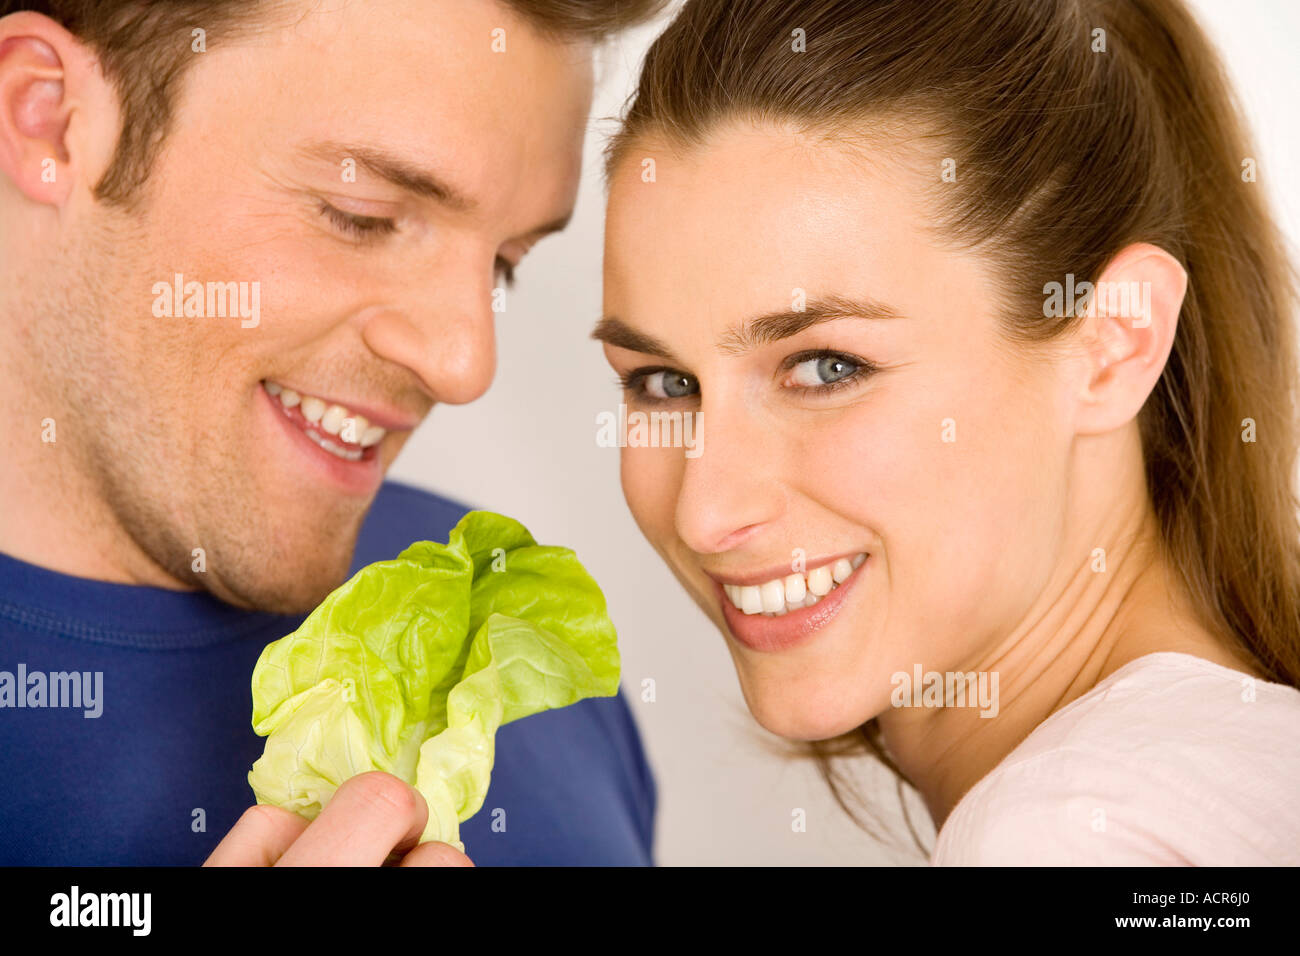 Young couple with lettuce leaf, smiling, close-up Stock Photo